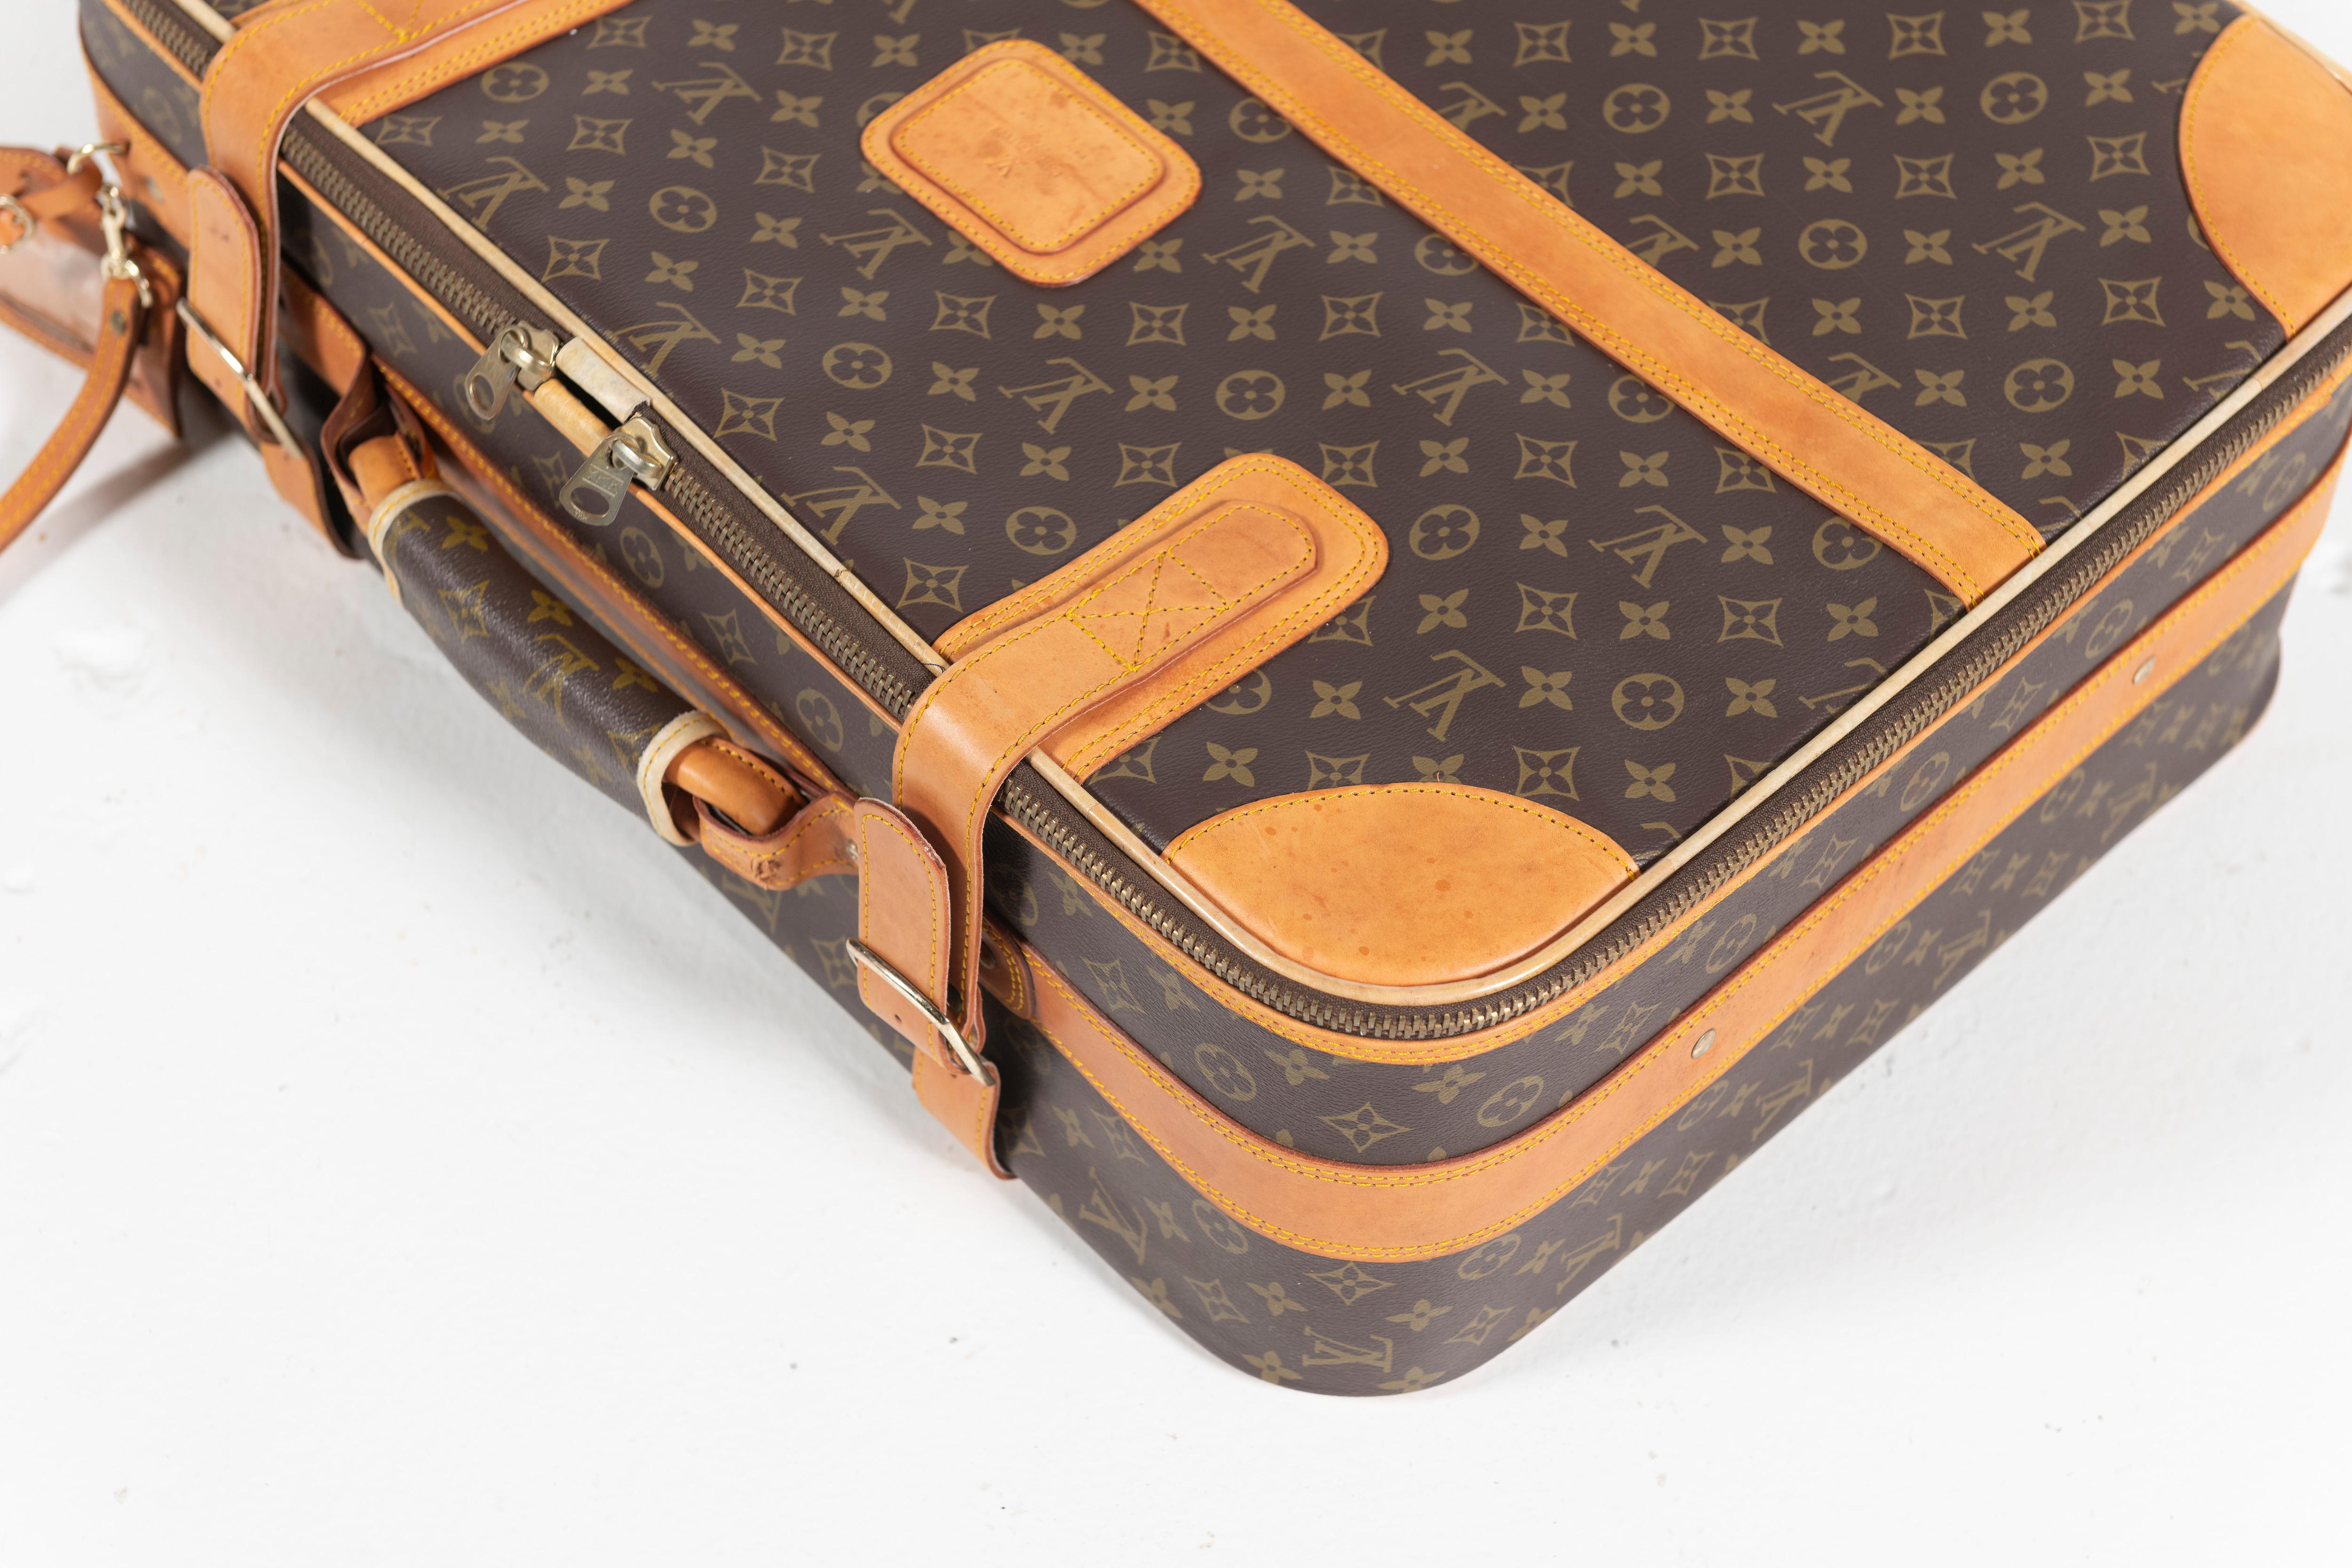 Vintage Louis Vuitton Suitcase, Monogrammed Coated Canvas, Small-Sized For Sale 4